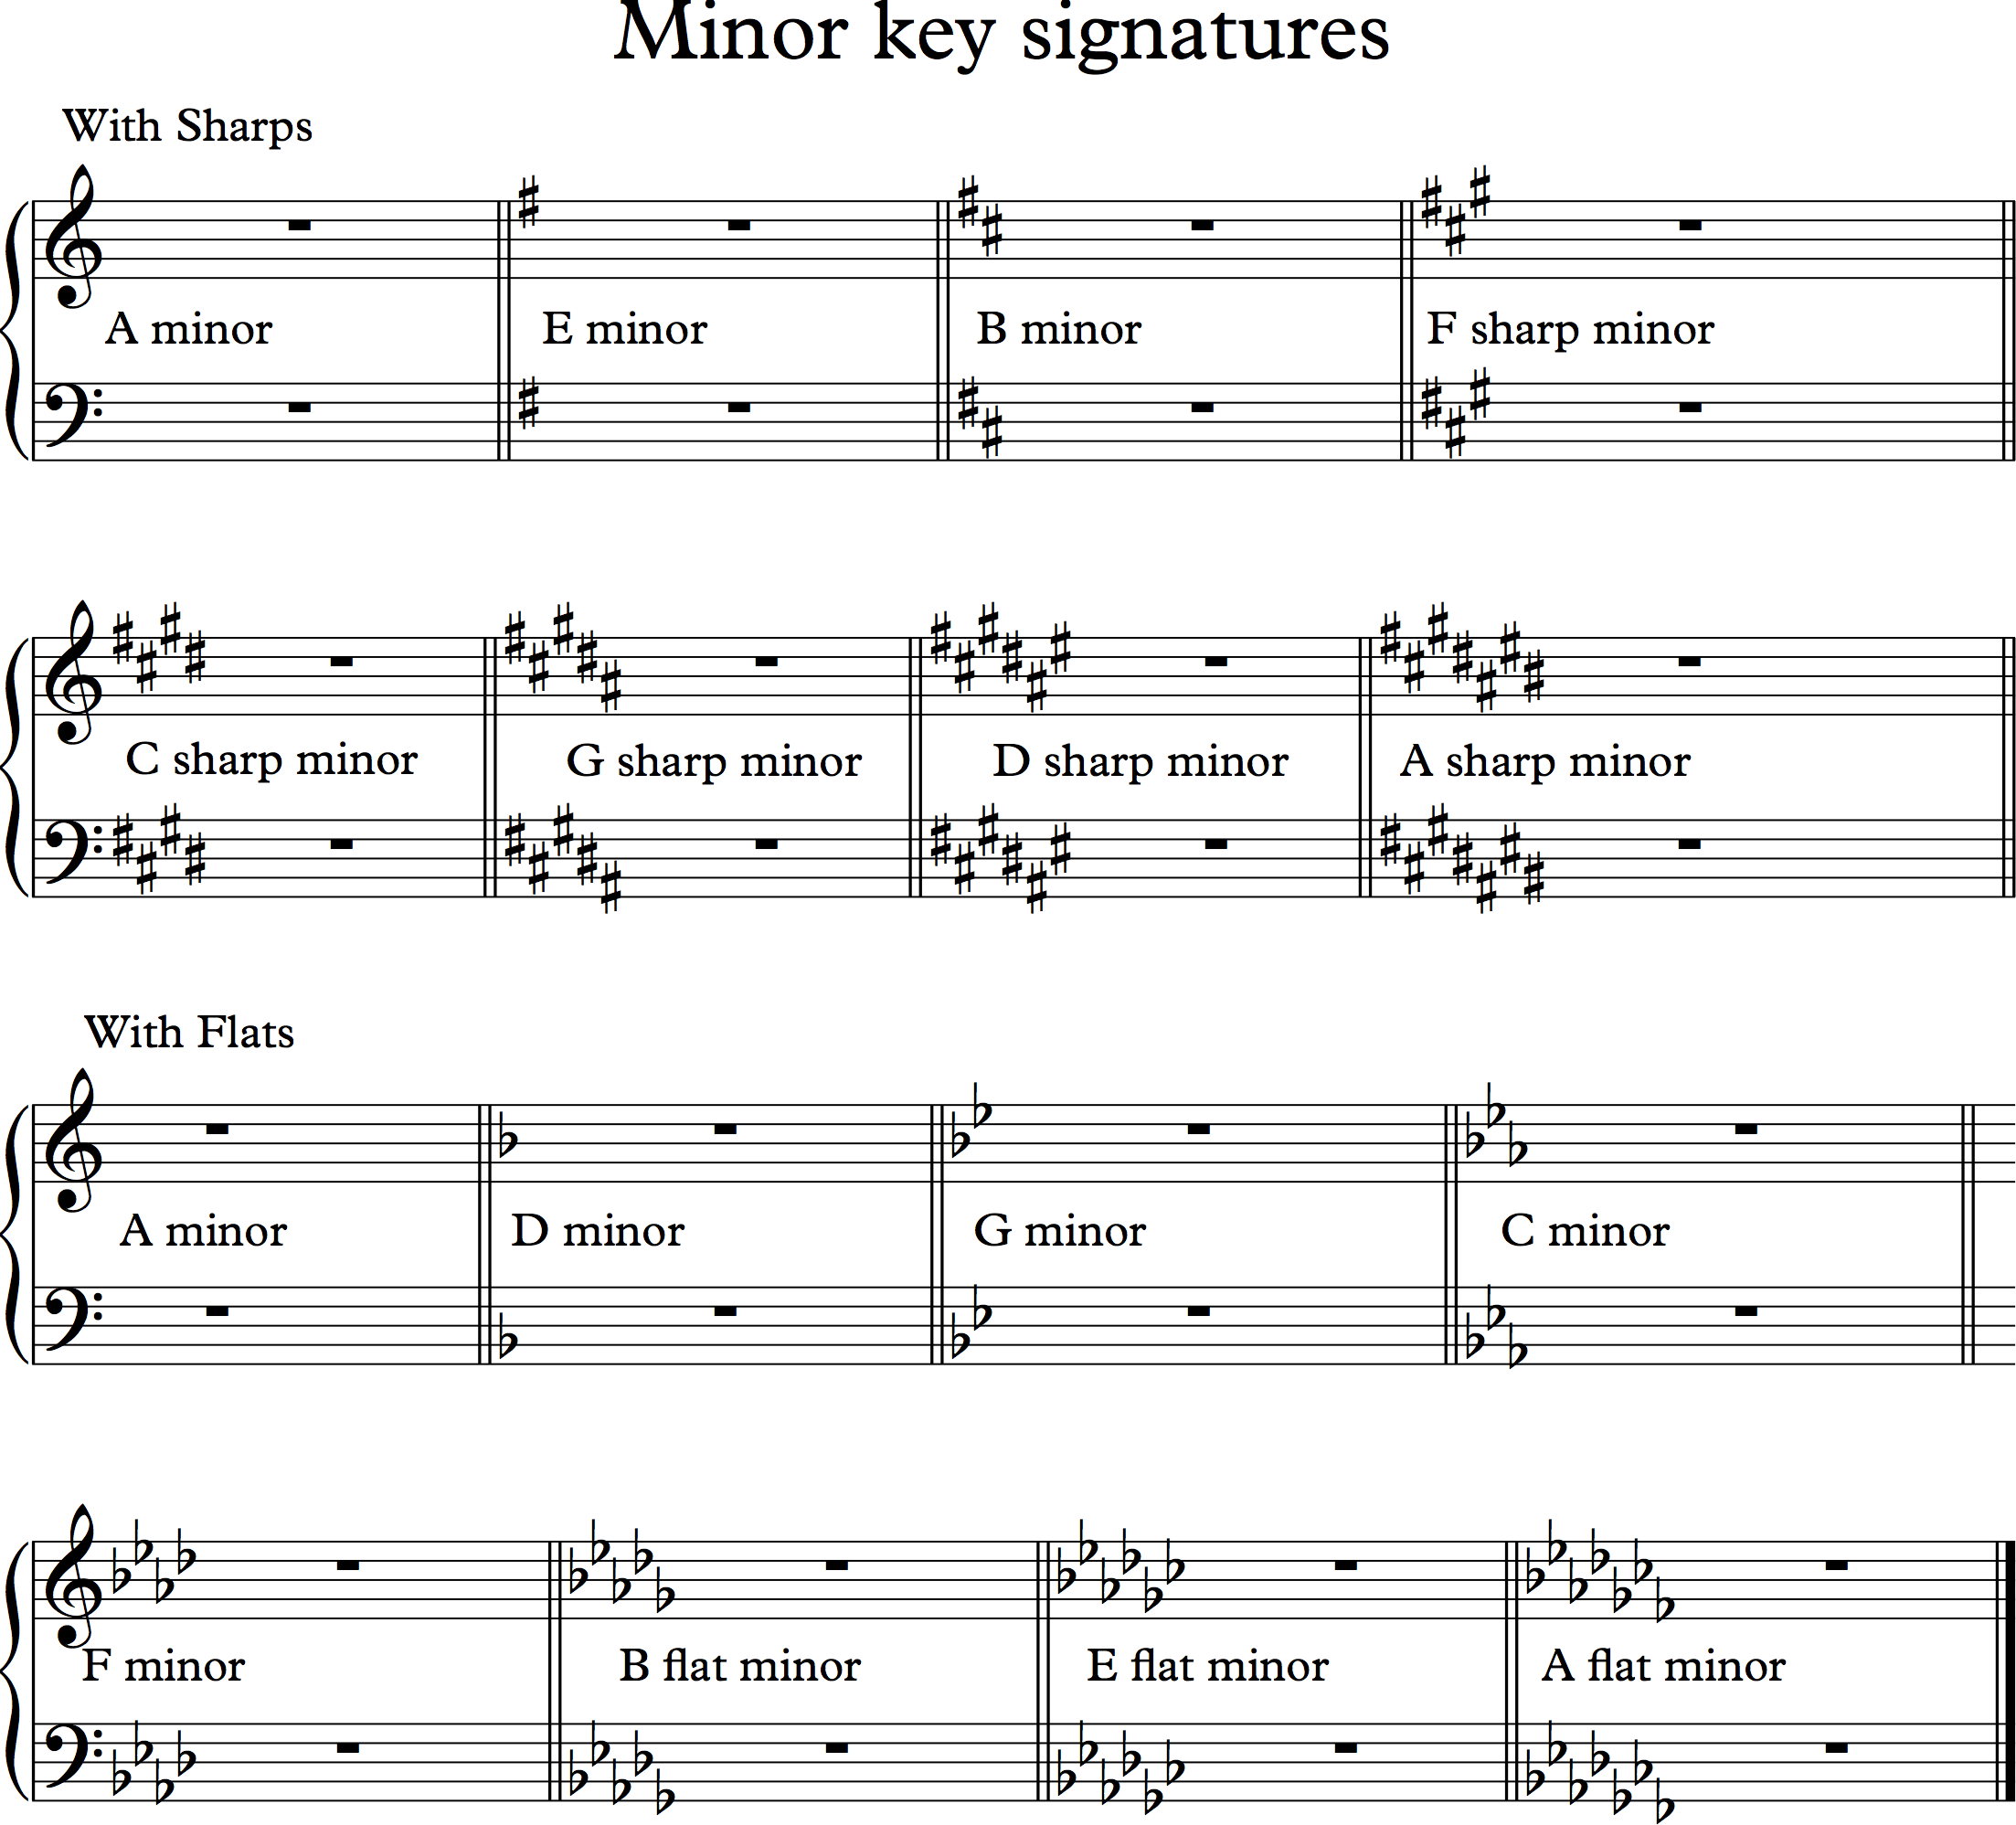 on what scale degree g minor in the key of b flat